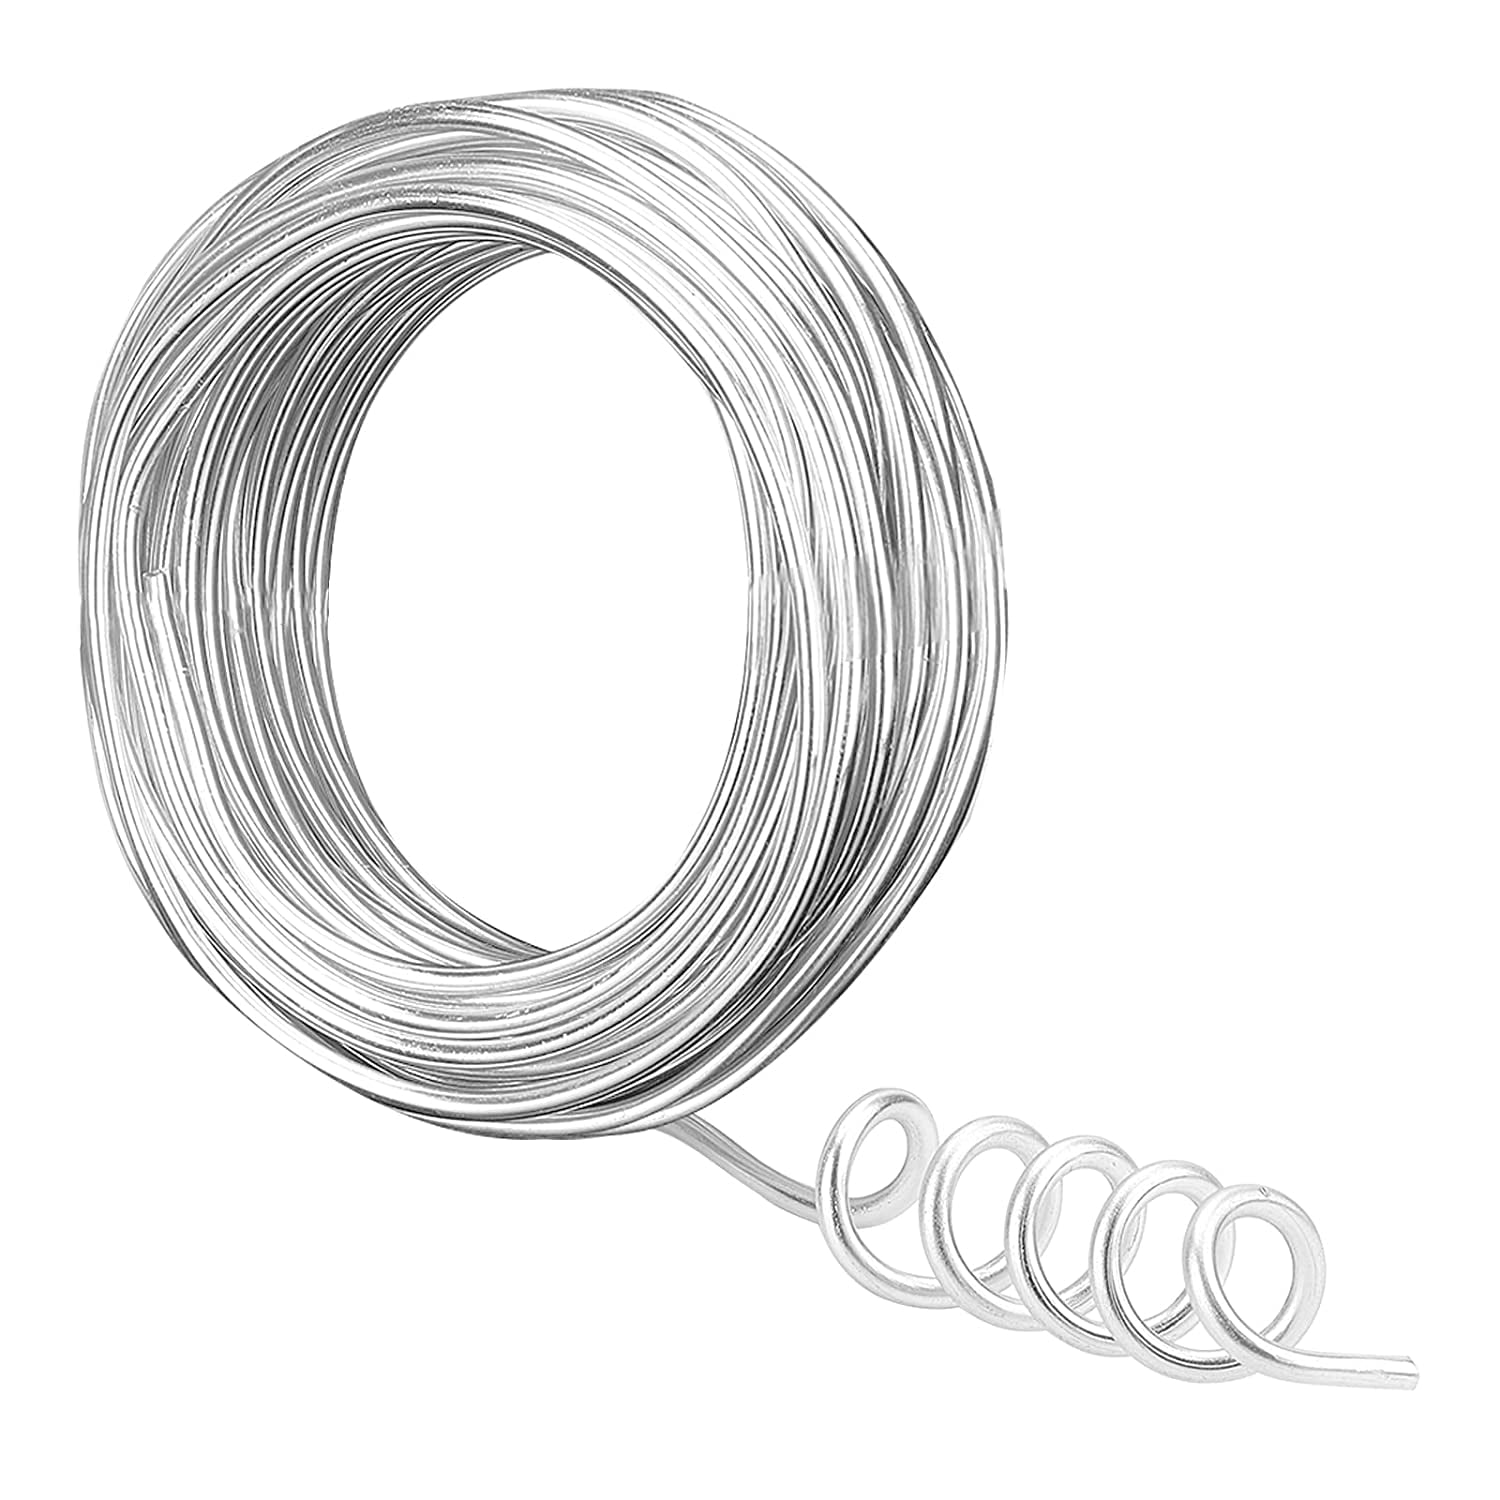 2 Rolls Silver Aluminum Craft Wire, DaKuan Bendable Metal Wire for Making  Dolls Skeleton DIY Crafts, Each Roll 32.8 Feet (1mm and 3 mm Thickness) 